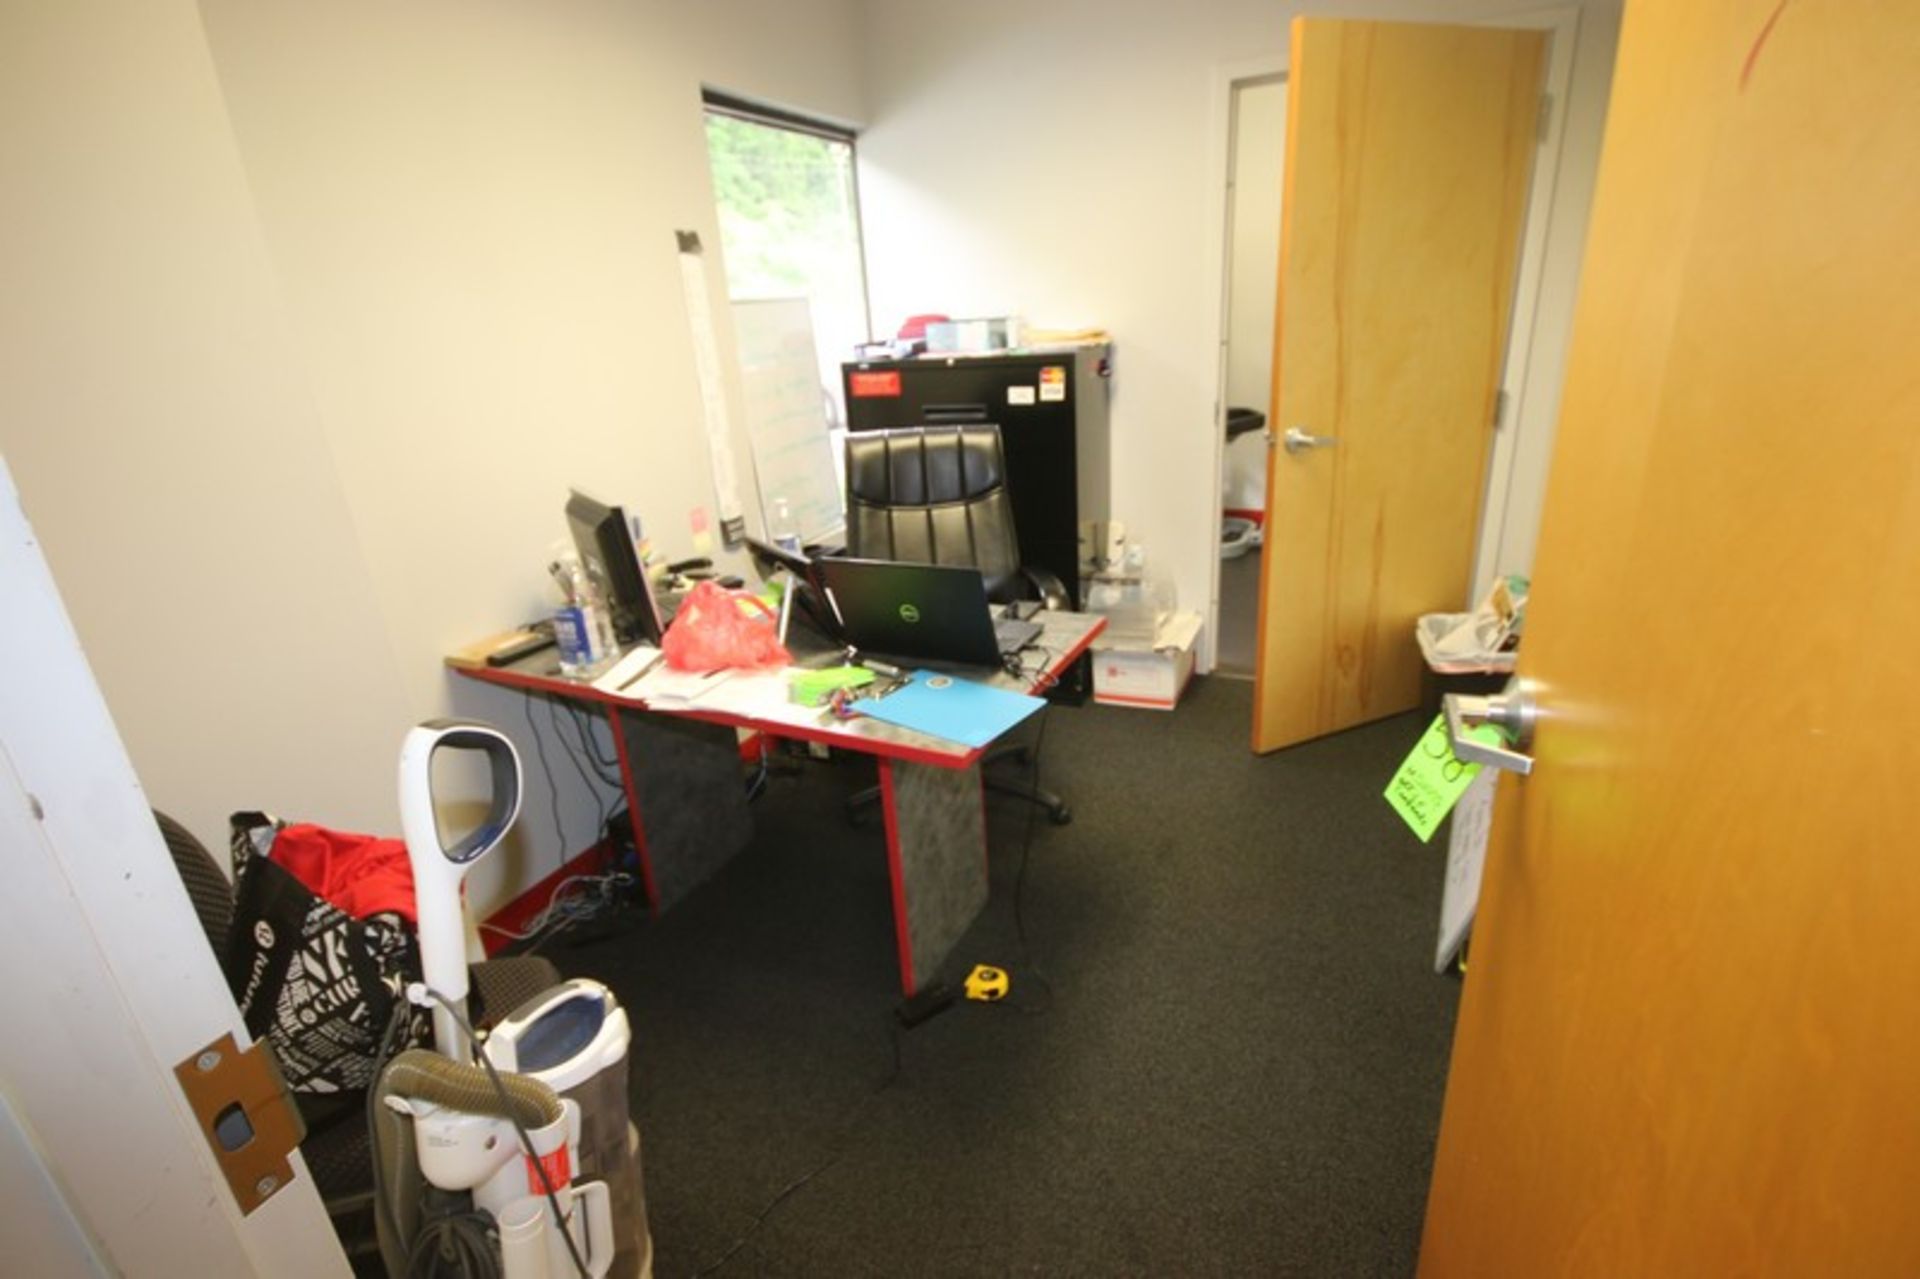 Contents of Office, Includes (1) Desk, (1) Chair, 4-Drawer Horizontal Filing Cabinet, Marker